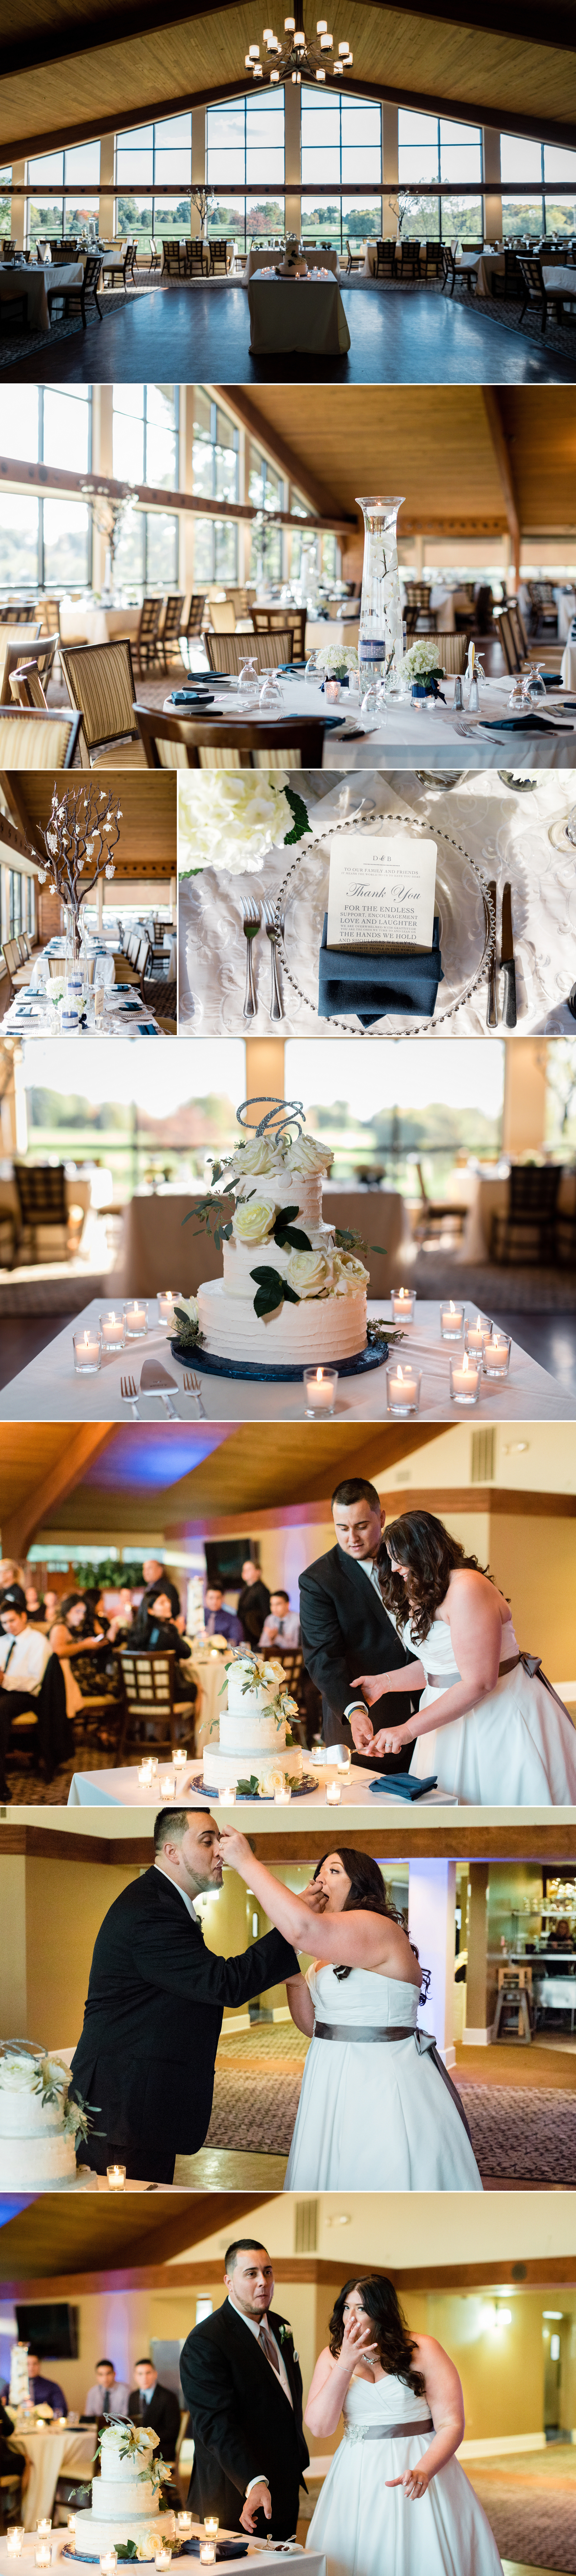 Venue photos from a Paint Creek Country Club Wedding